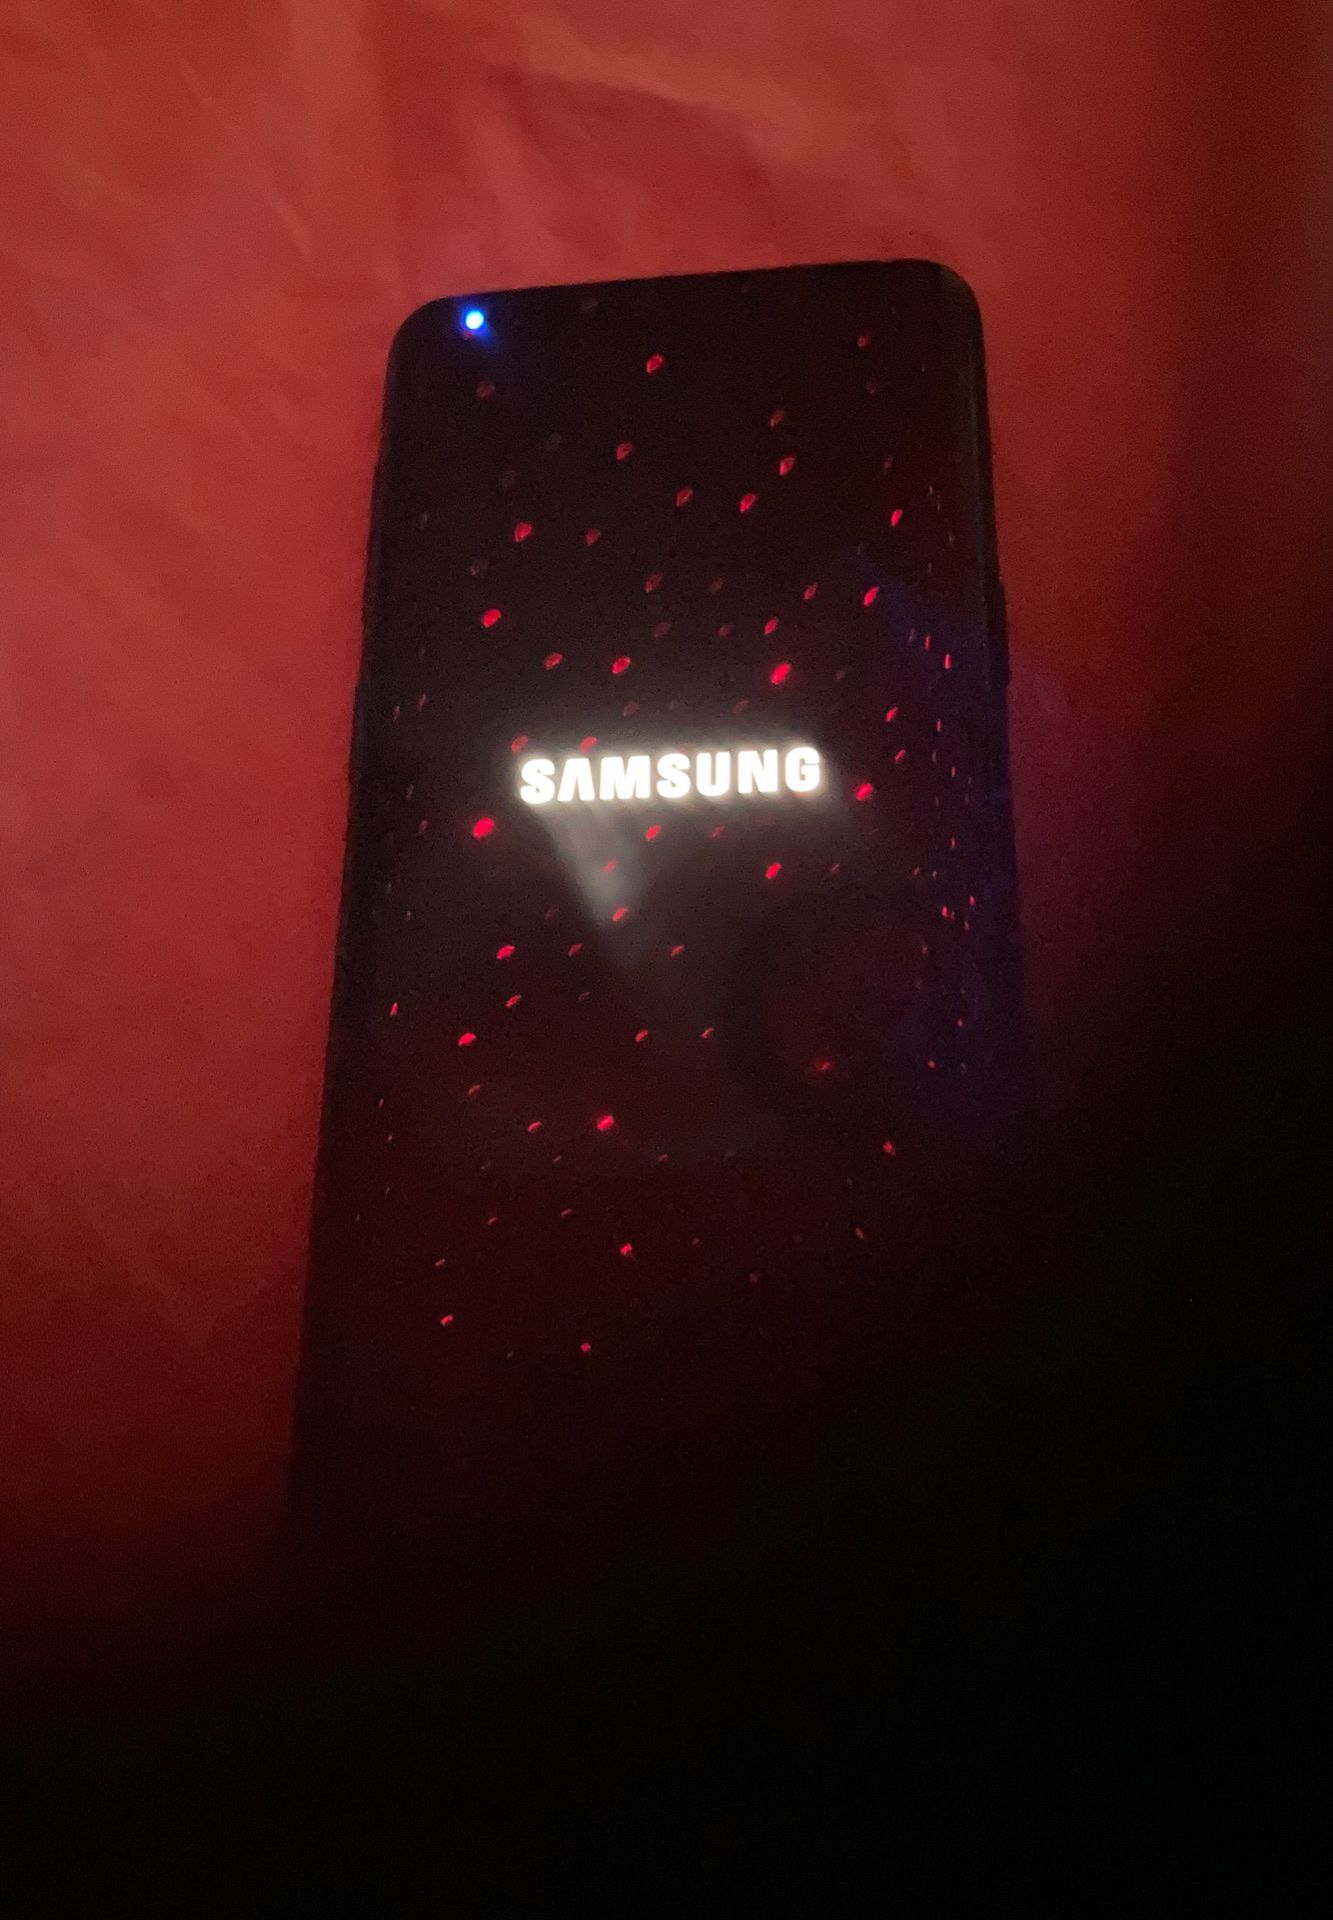 Galaxy s 9 small crack right up side with Samsung-G2 watch